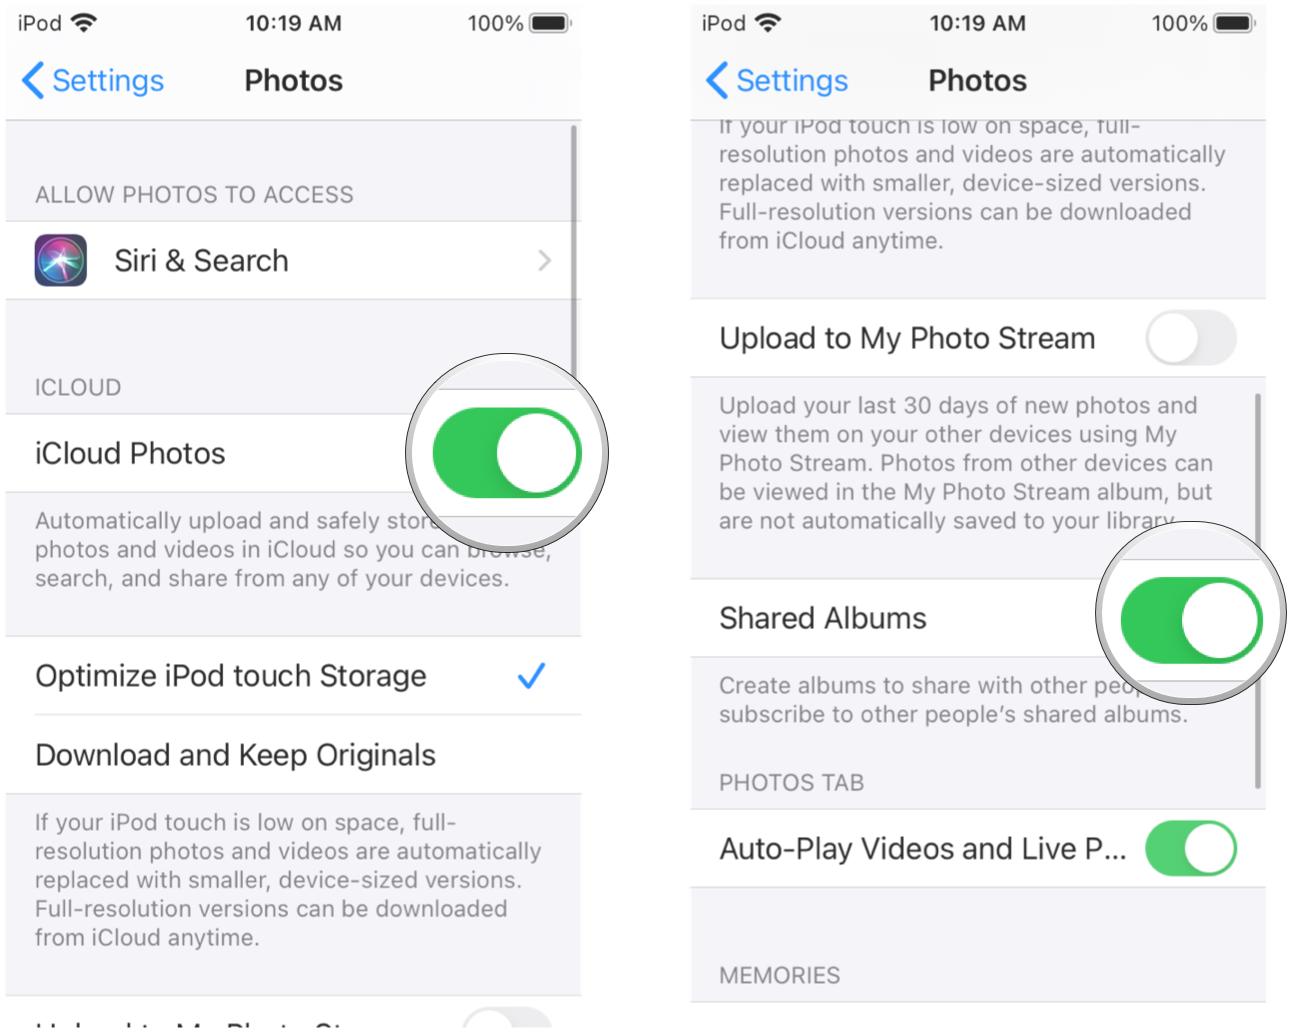 Enable iCloud Photo Sharing on your iPhone or iPad by showing steps: Toggle iCloud Photo Library to ON, as well as Shared Albums to ON